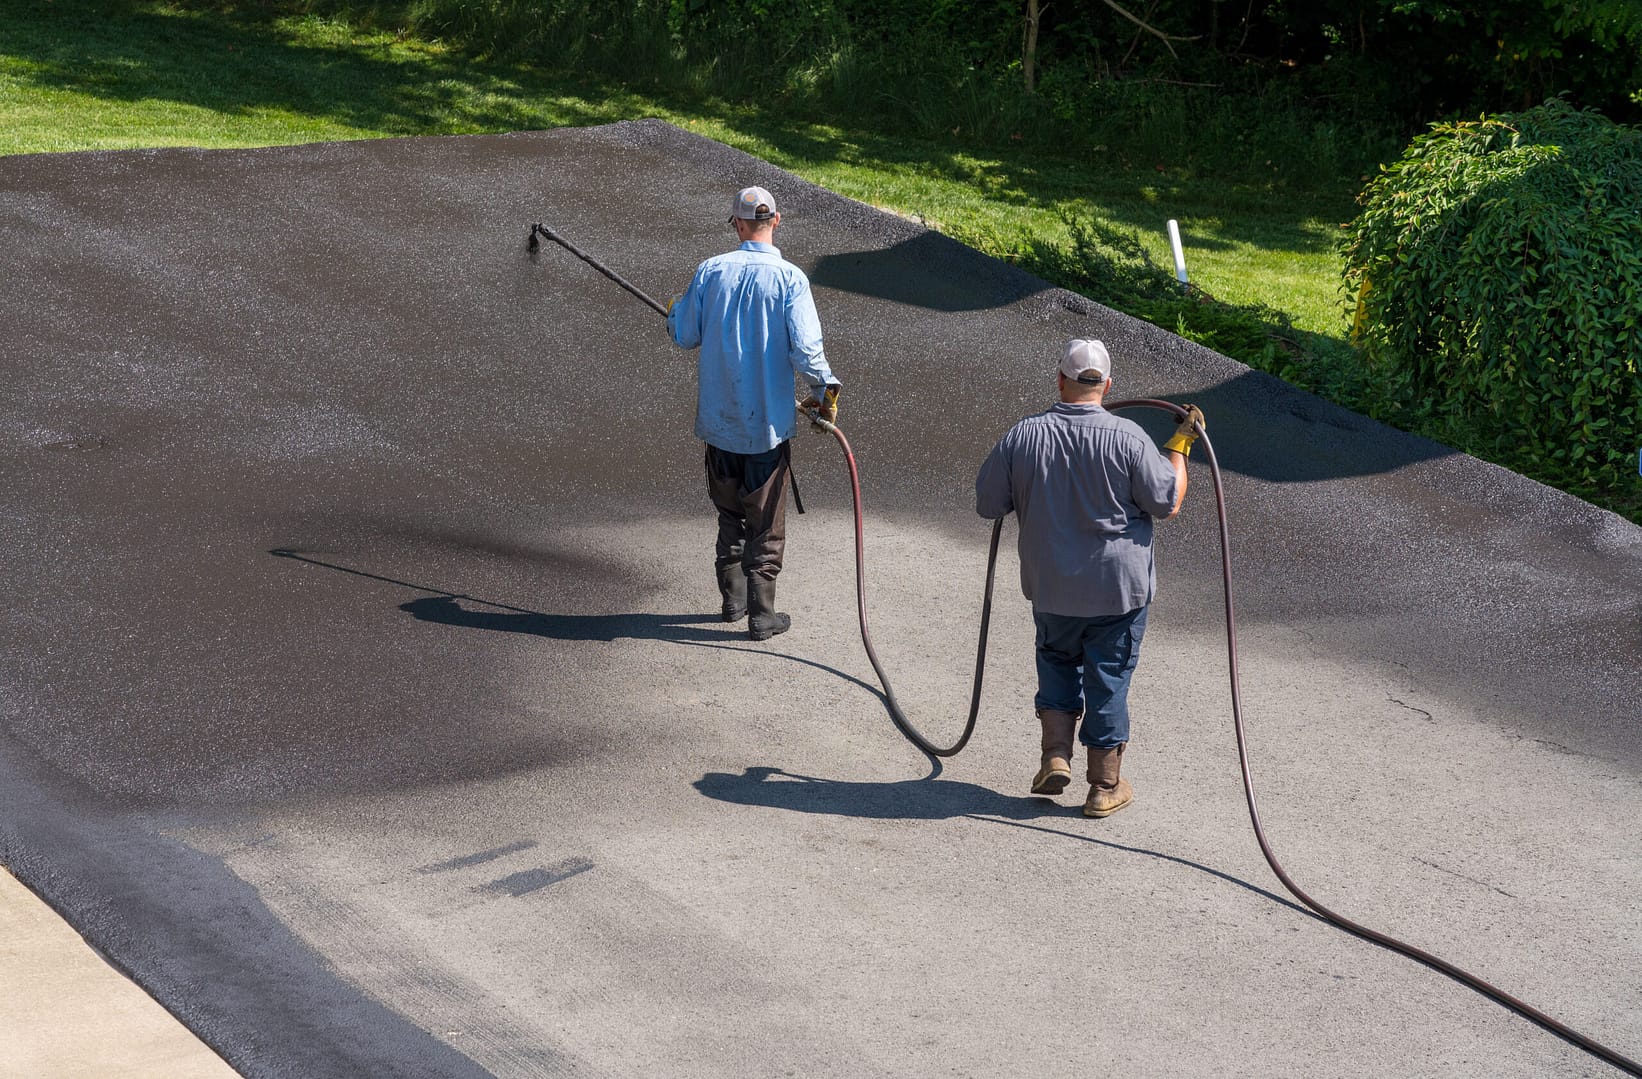 Workers using a spray machine to apply blacktop sealer to an asphalt street, creating a protective coat against the elements.